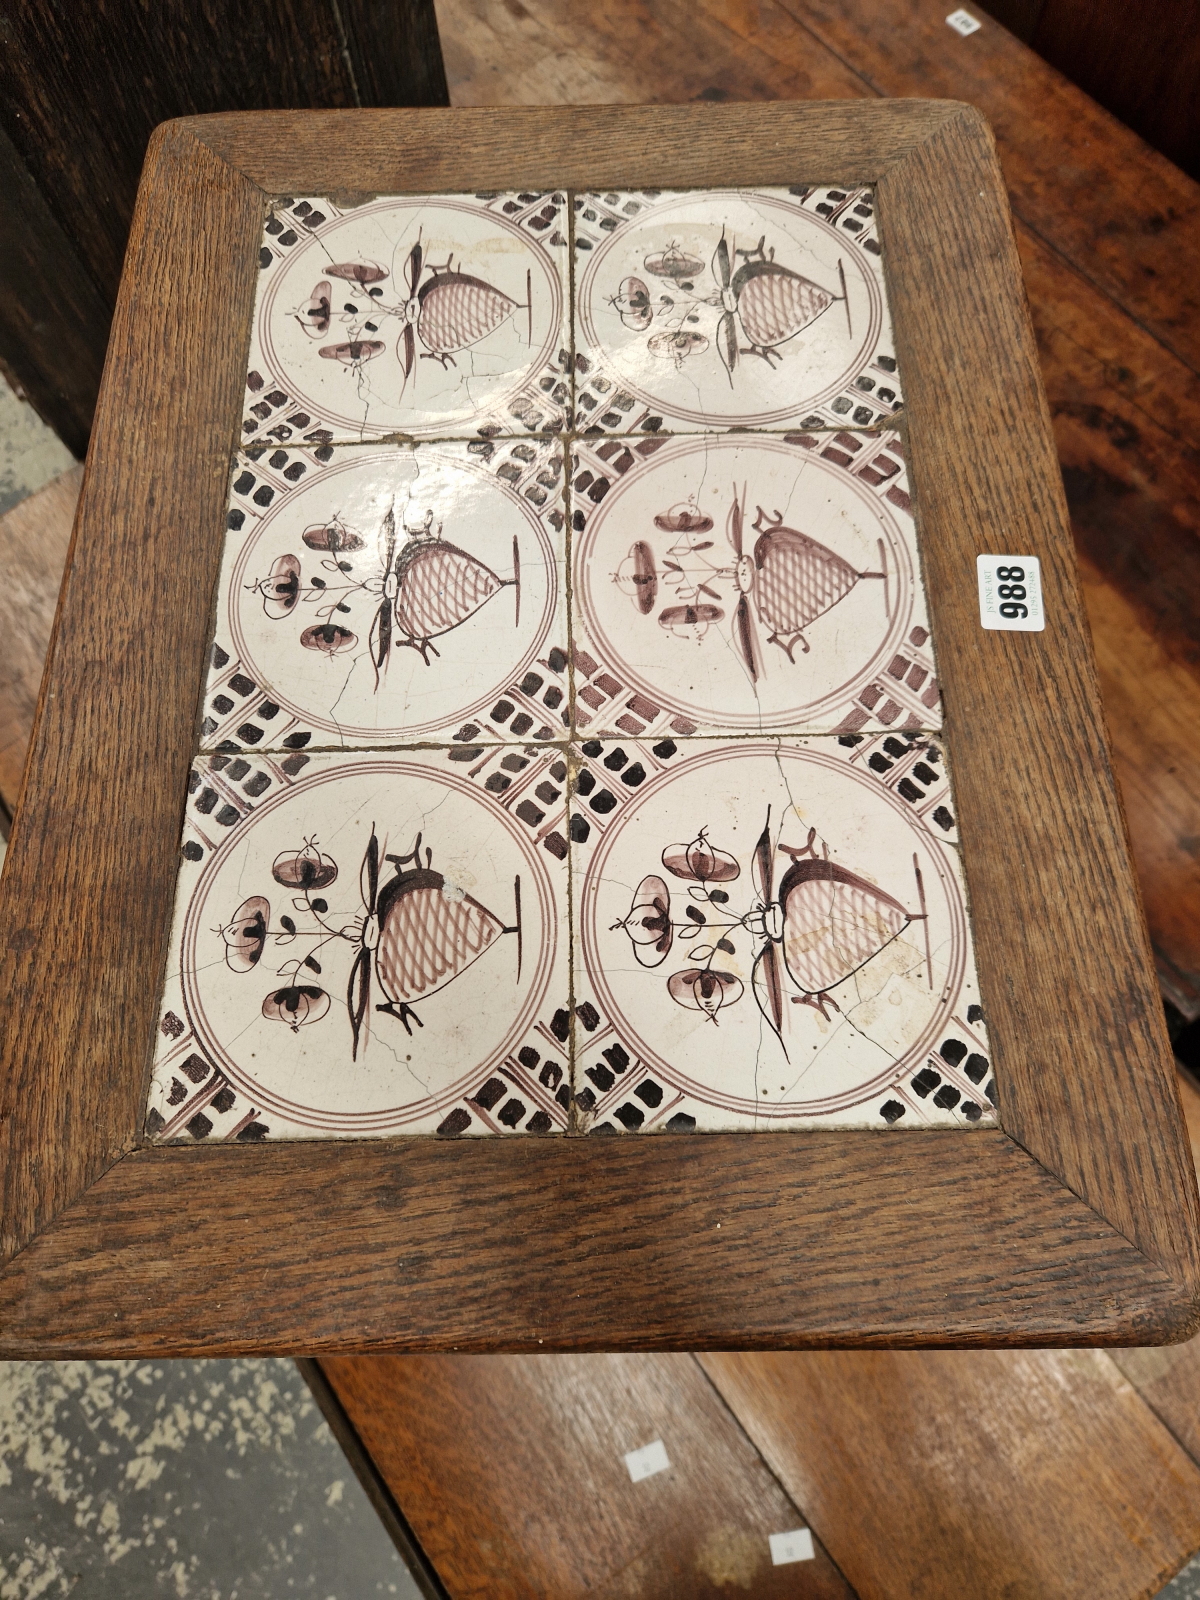 AN OAK COFFEE TABLE INSET WITH SIX DELFT MANGANESE TILES, THE PANEL LEGS PEGGED TO THE STRETCHER. - Image 2 of 4